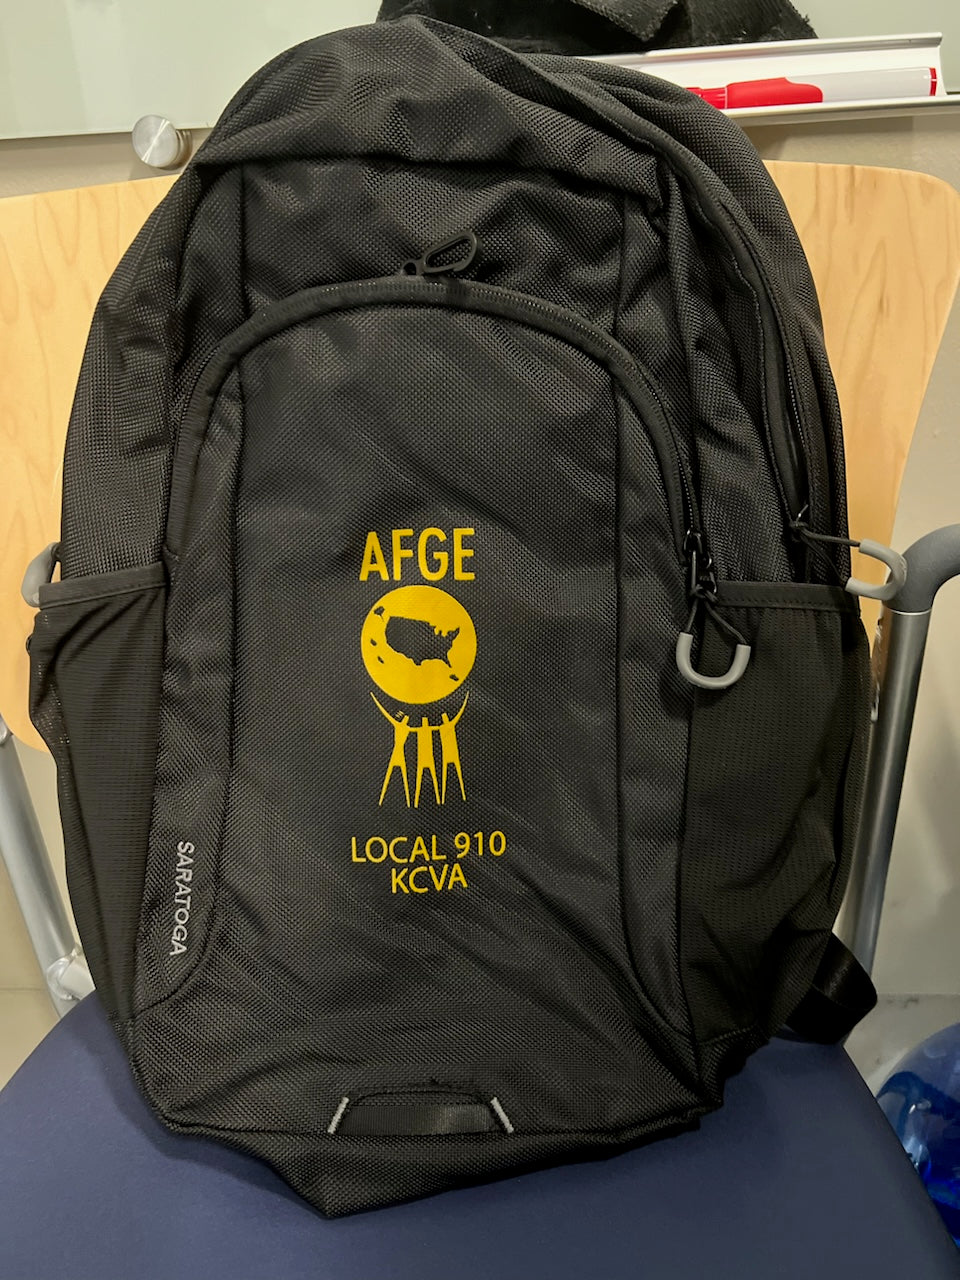 Smaller  AFGE Backpack with zipper closure